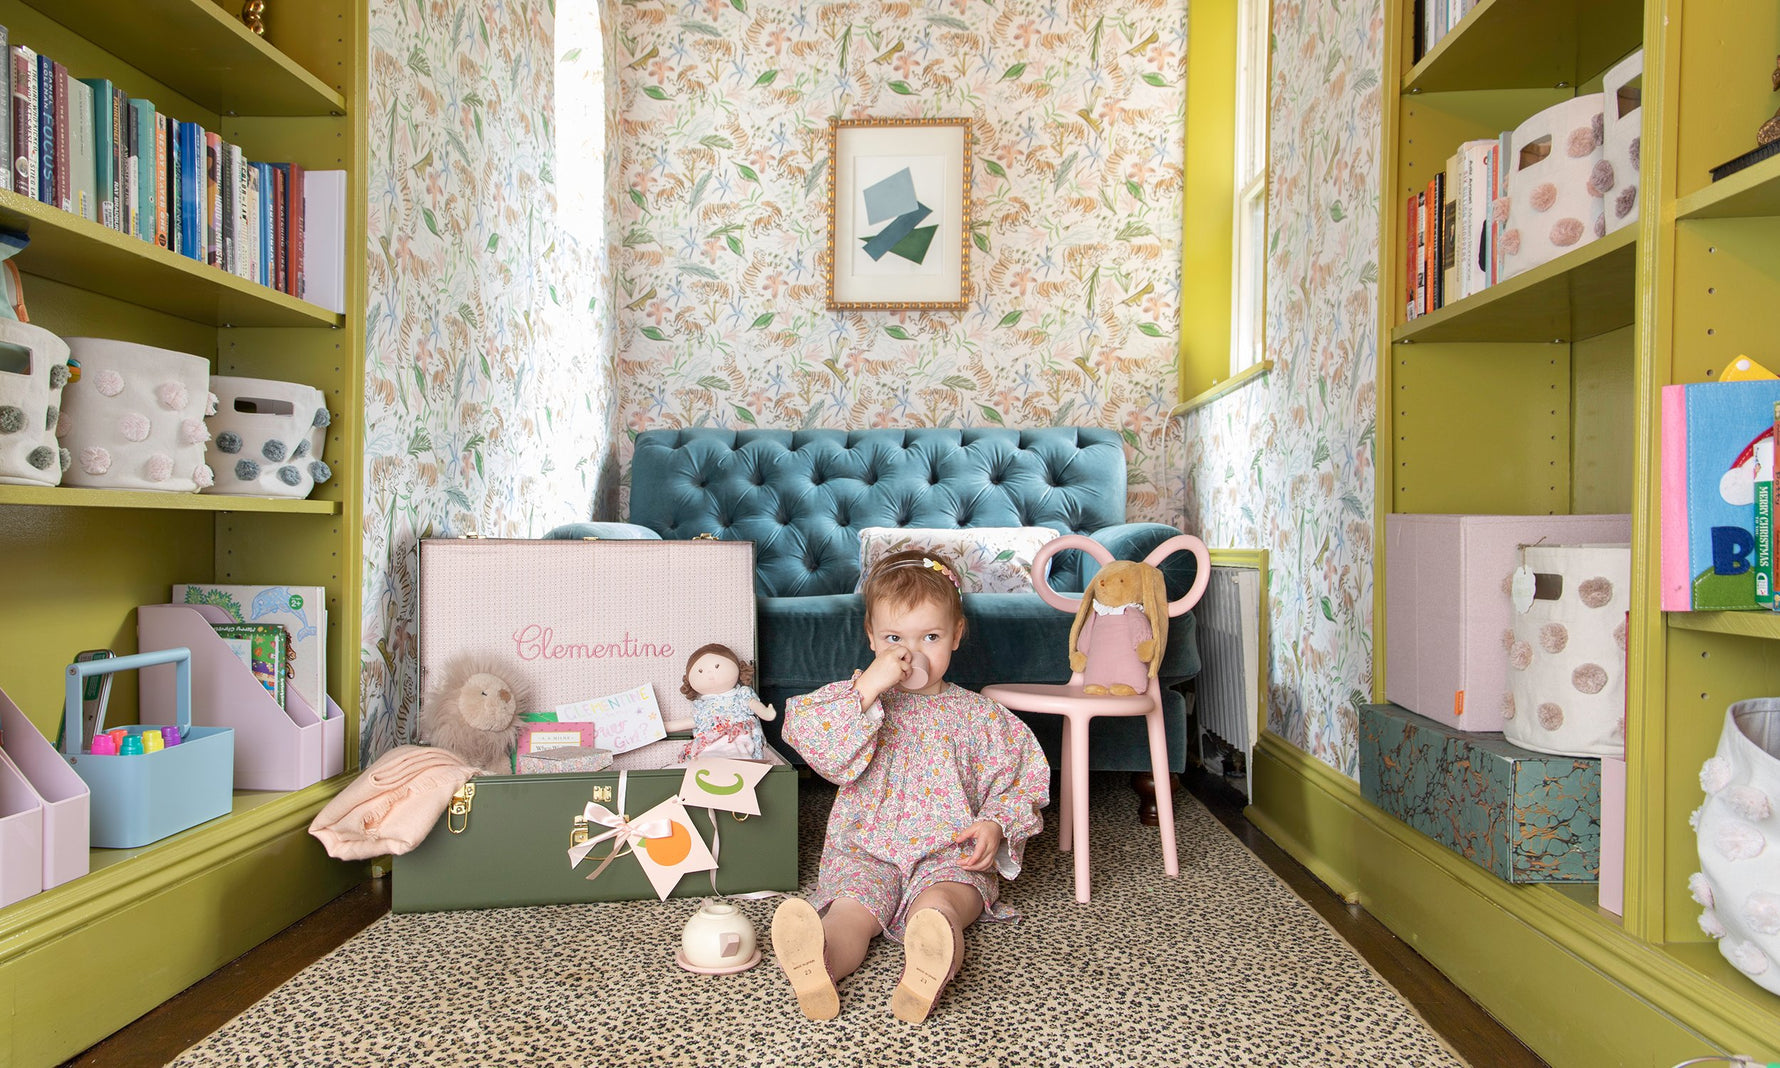 The Nursery & Kids Collection